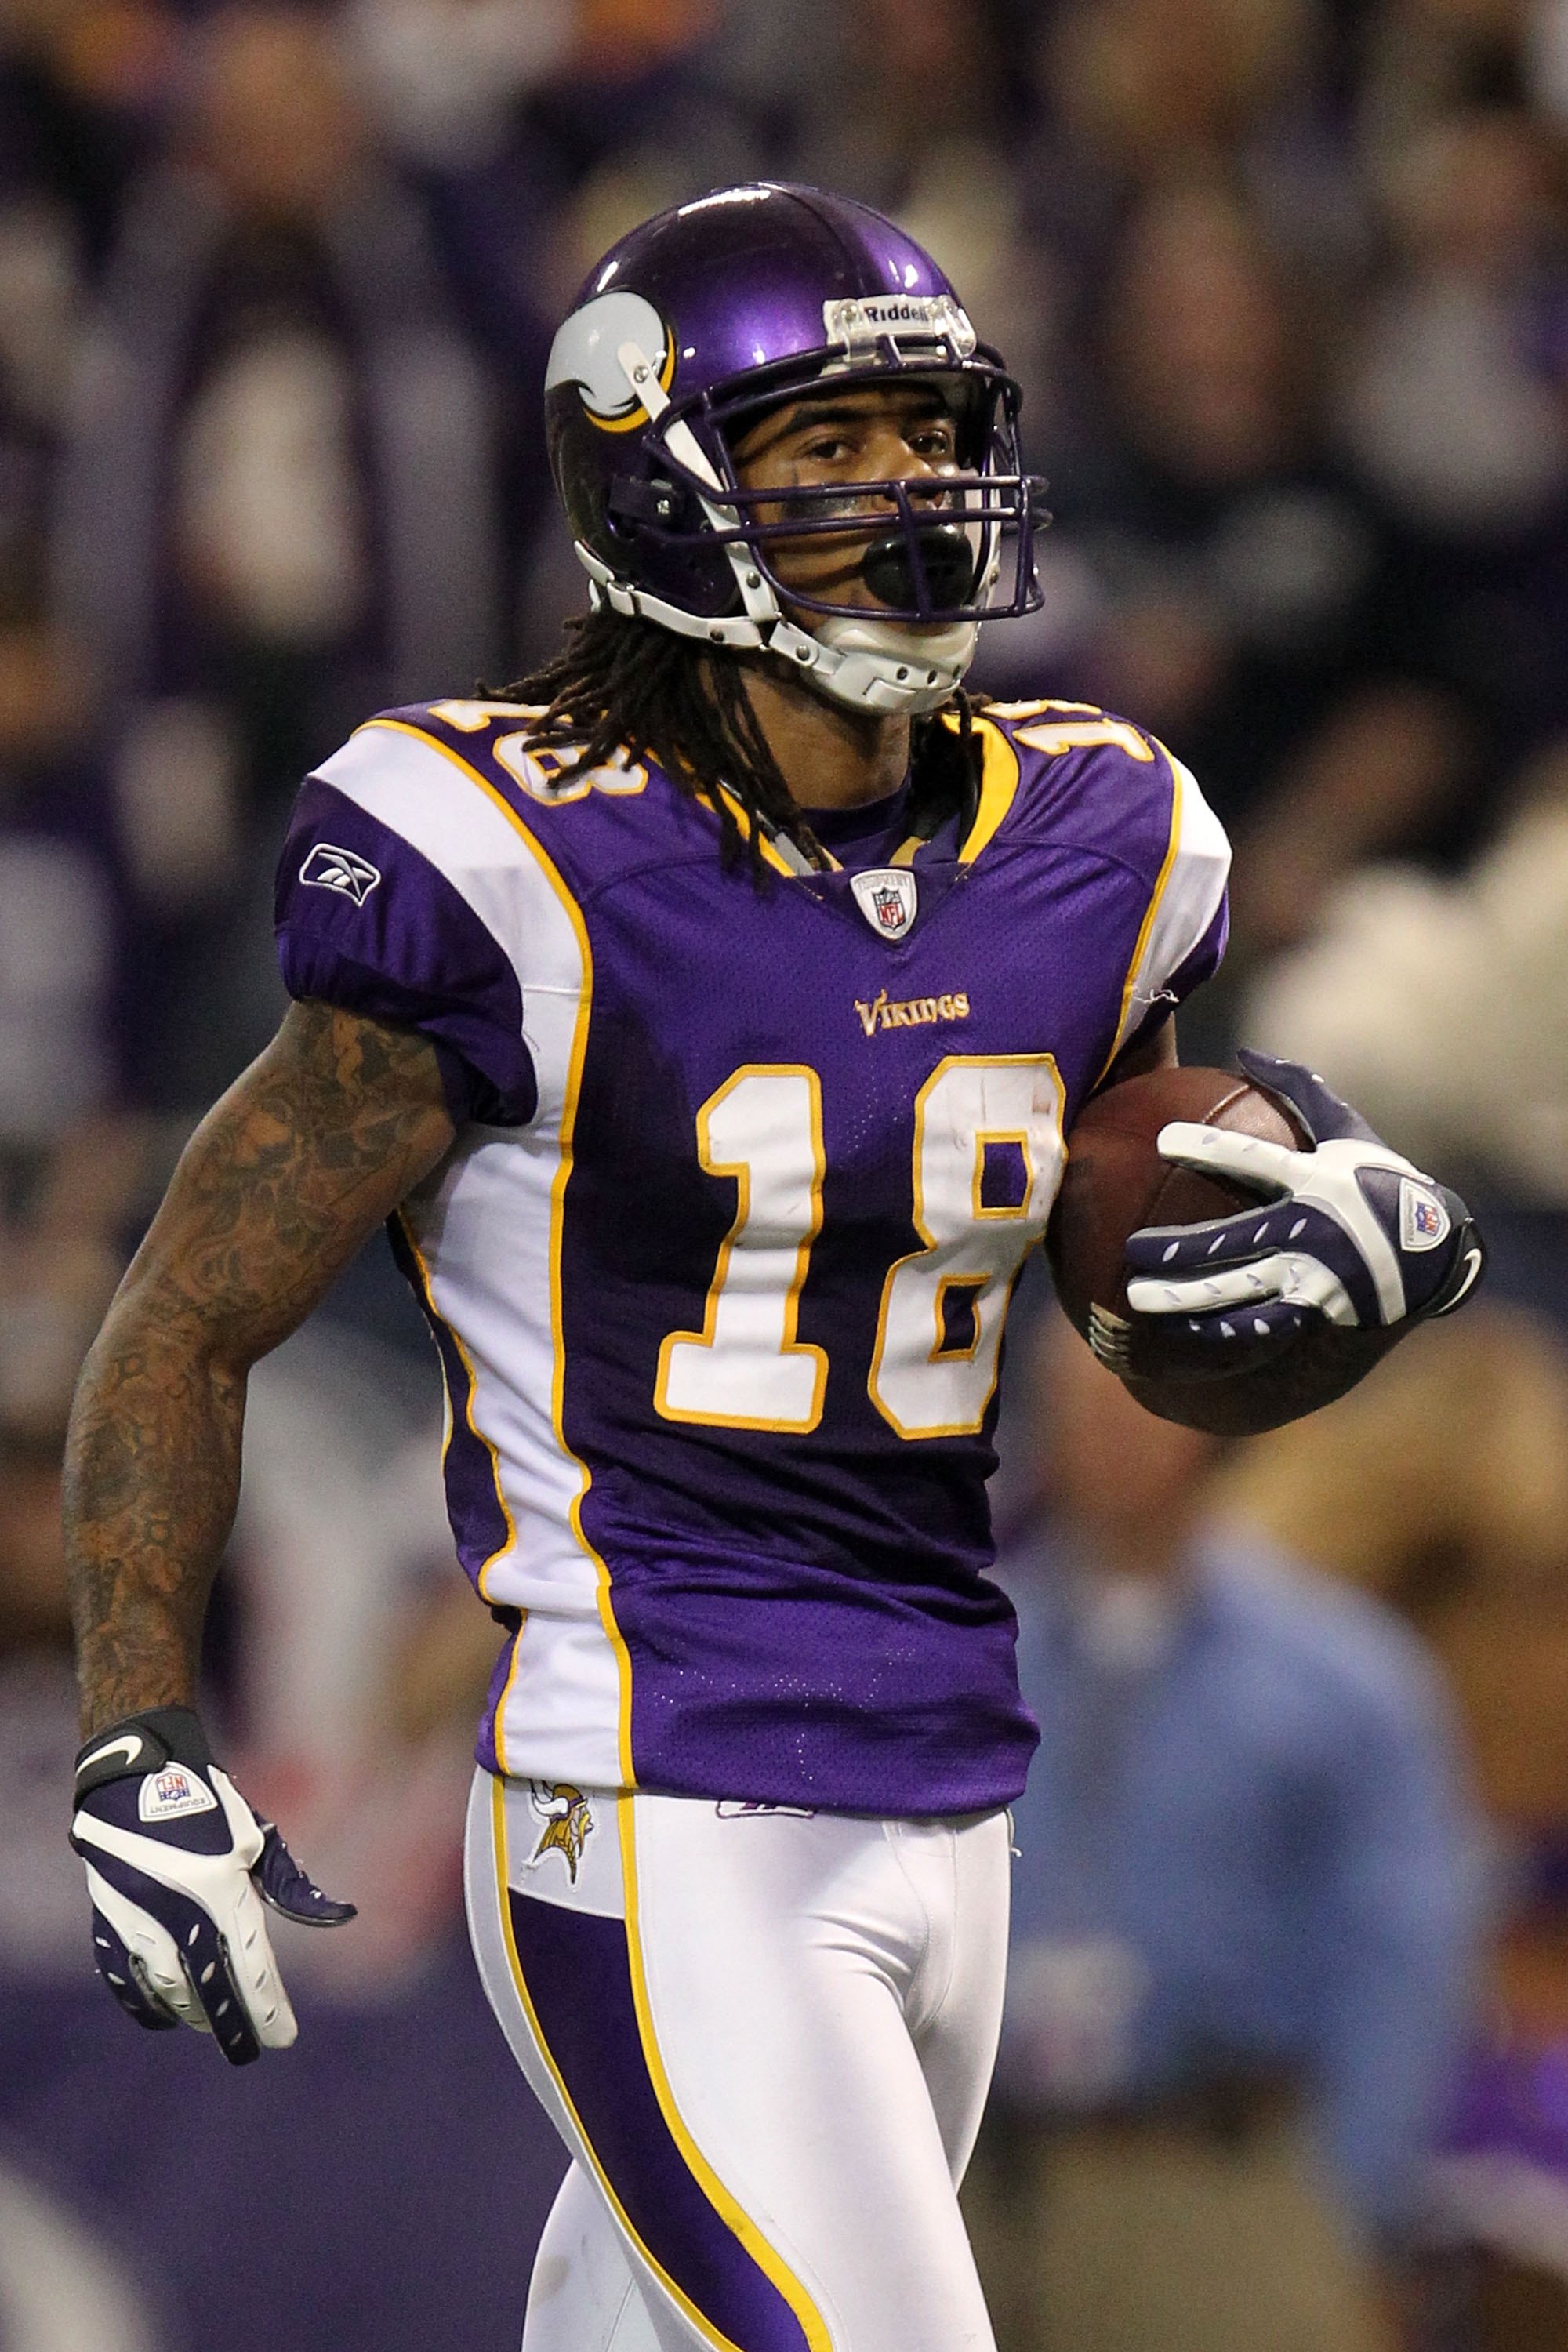 MINNEAPOLIS - JANUARY 17:  Wide receiver Sidney Rice #18 of the Minnesota Vikings looks on after scoring a touchdown against the Dallas Cowboys during the NFC Divisional Playoff Game at Hubert H. Humphrey Metrodome on January 17, 2010 in Minneapolis, Minn